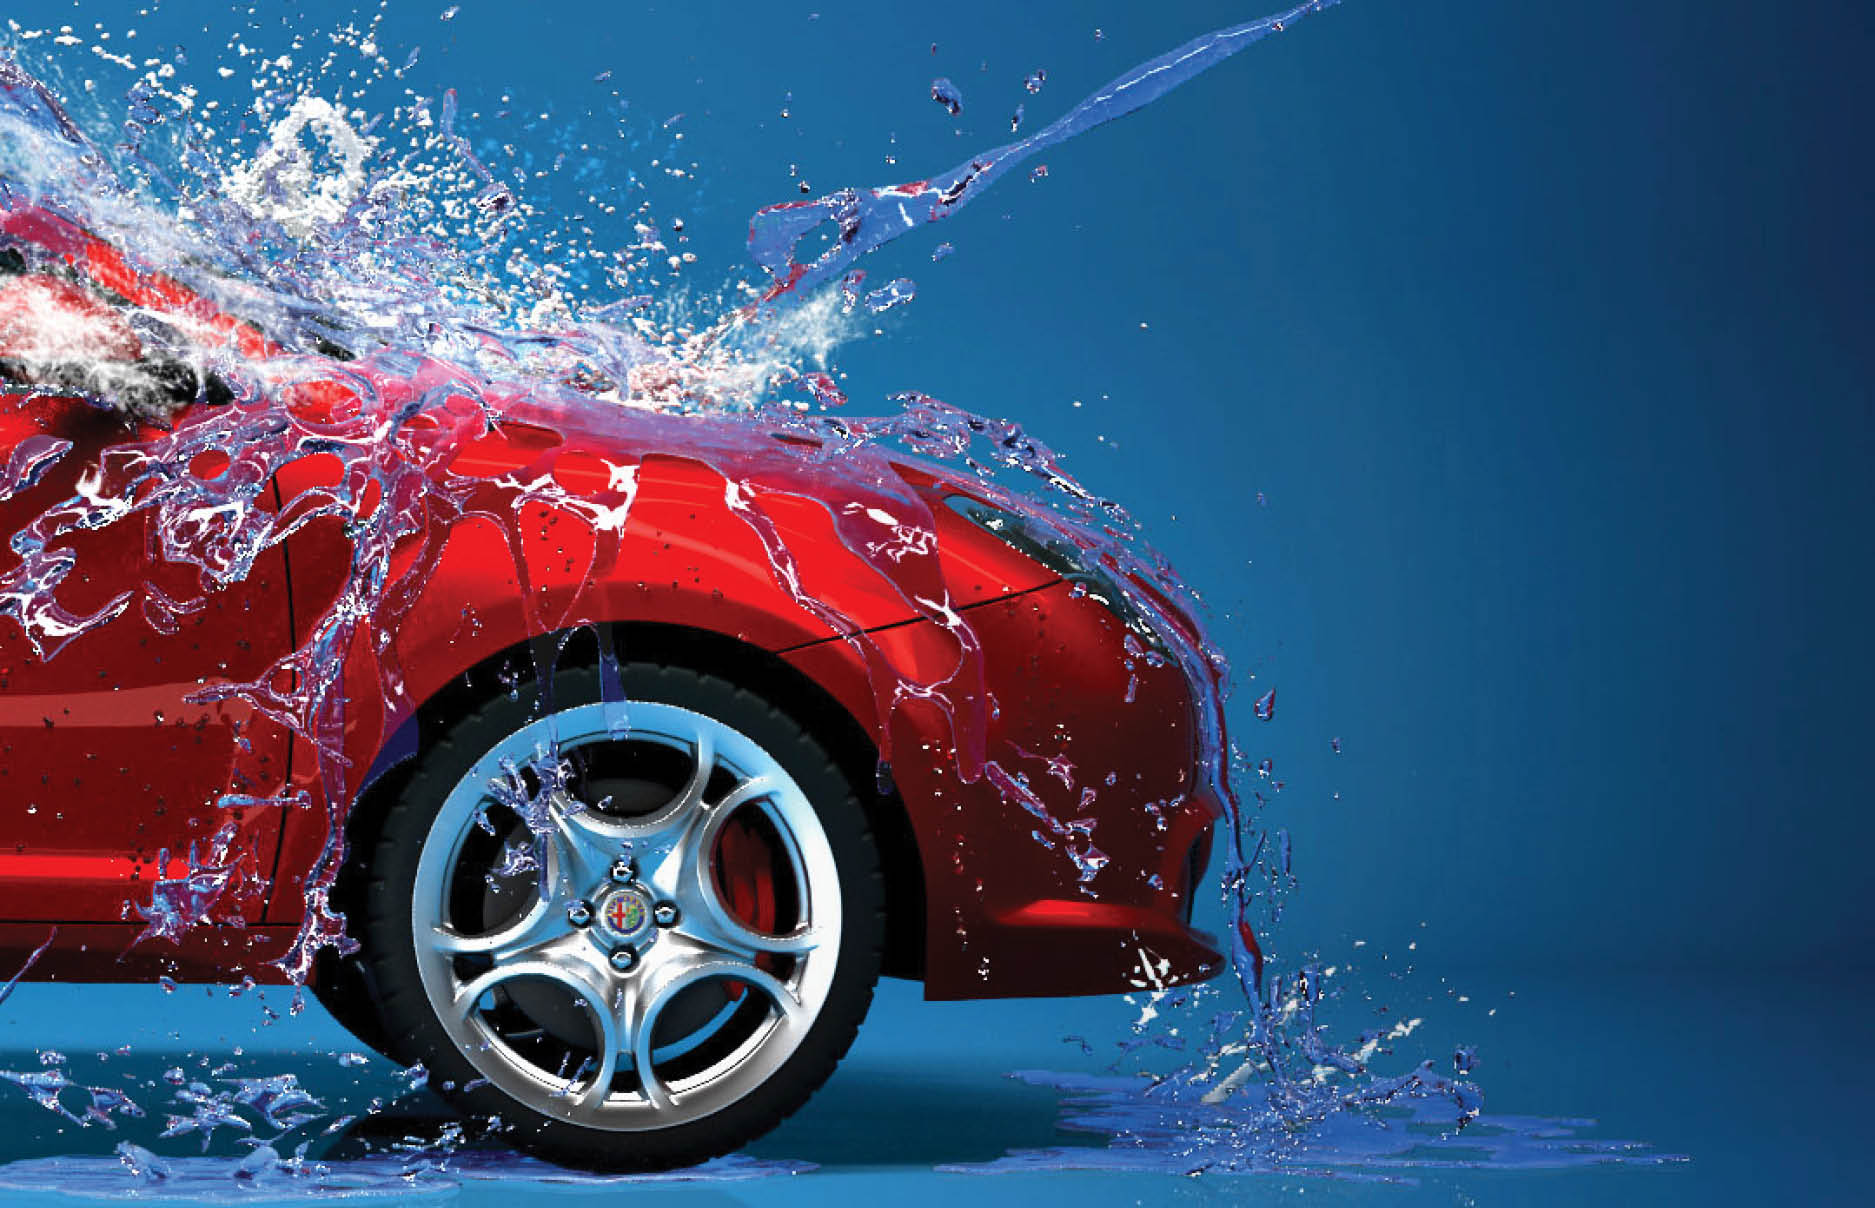 Marketing Automation for a Car Wash Business